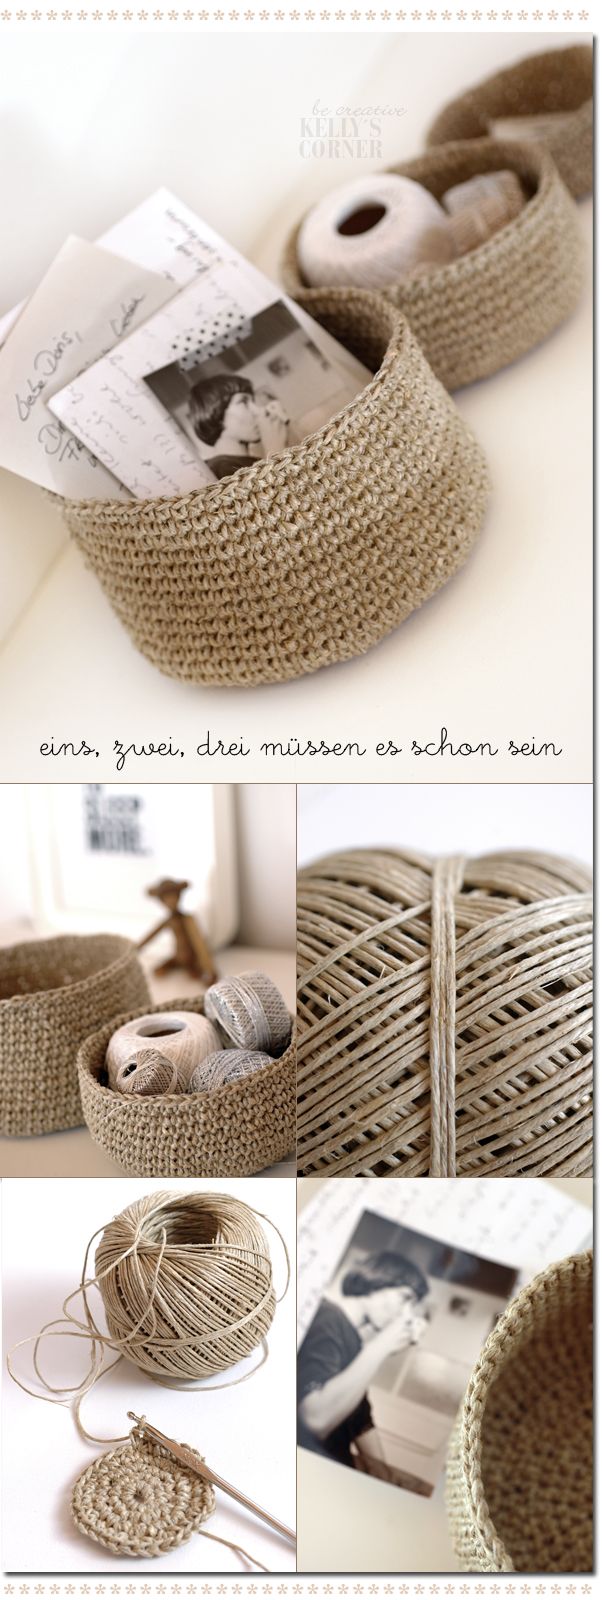 Crocheted storage bowls from packing twine.